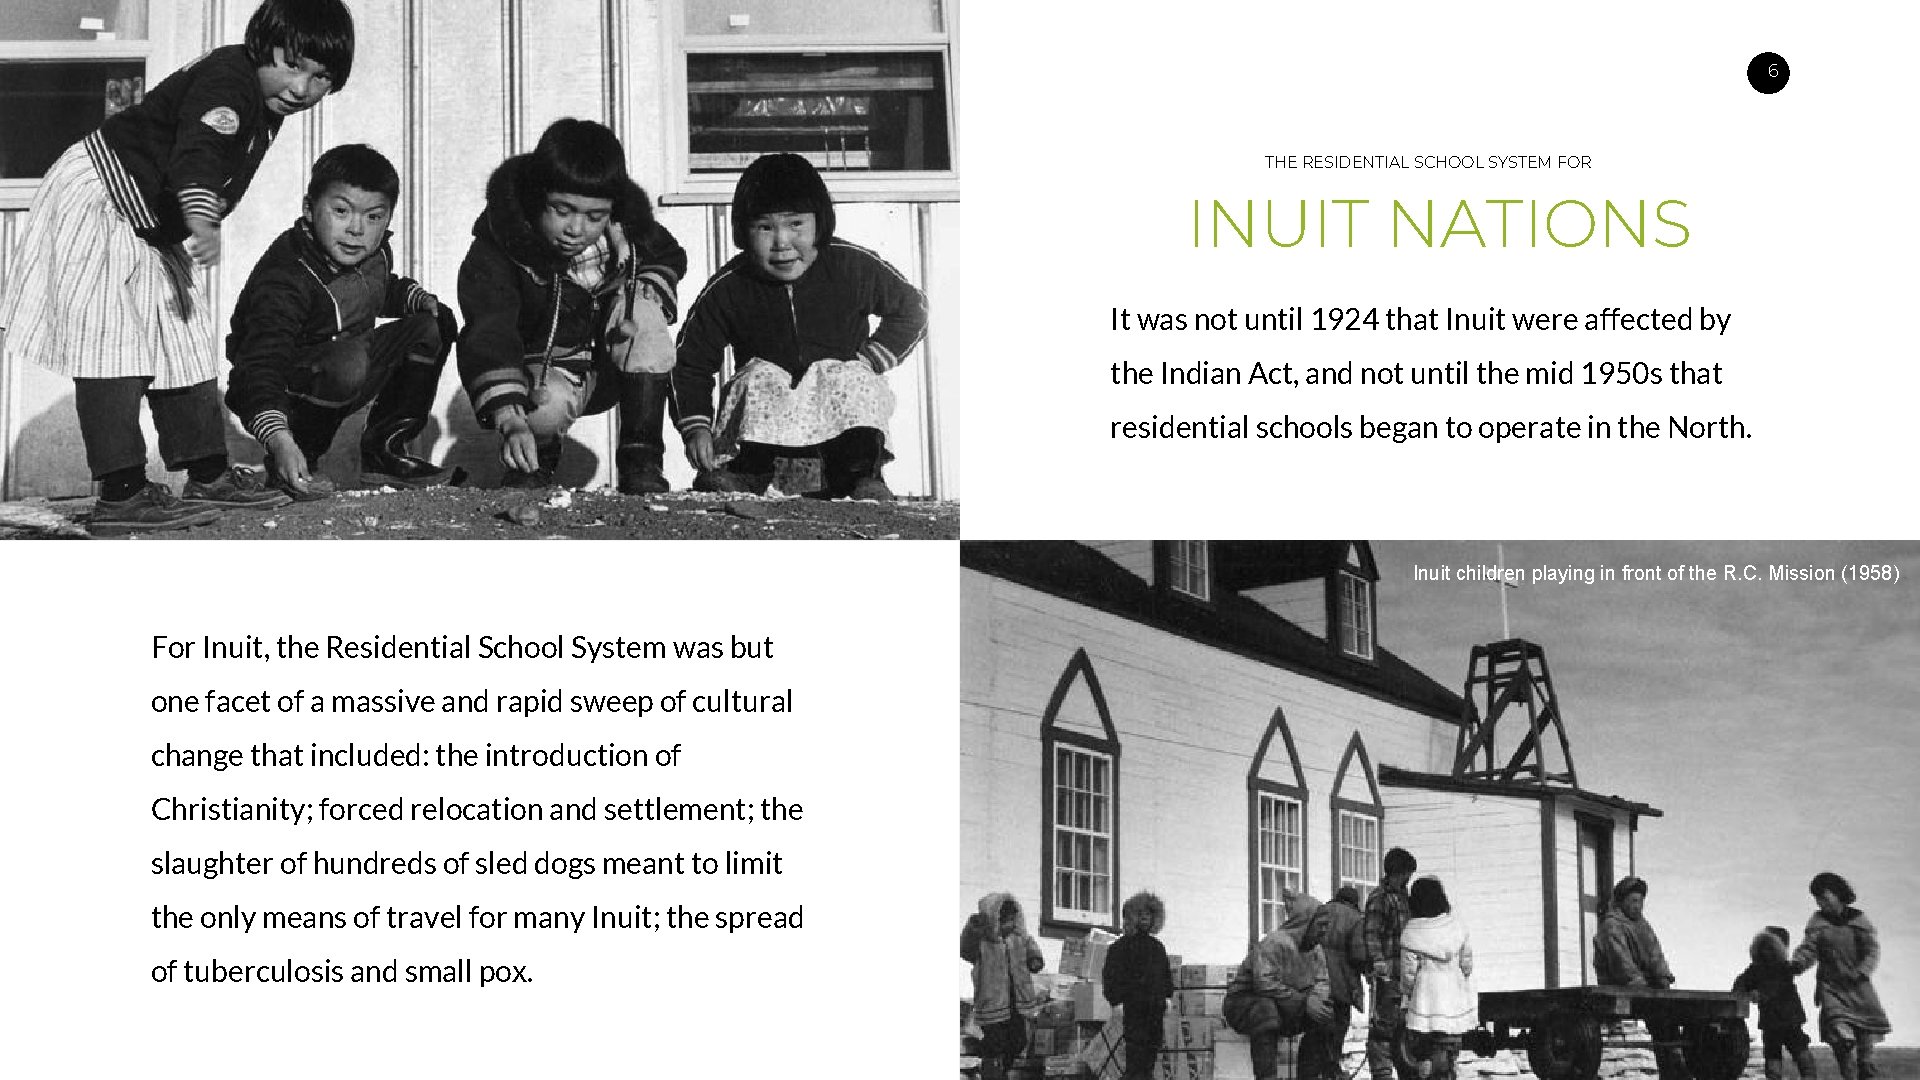 6 THE RESIDENTIAL SCHOOL SYSTEM FOR INUIT NATIONS It was not until 1924 that